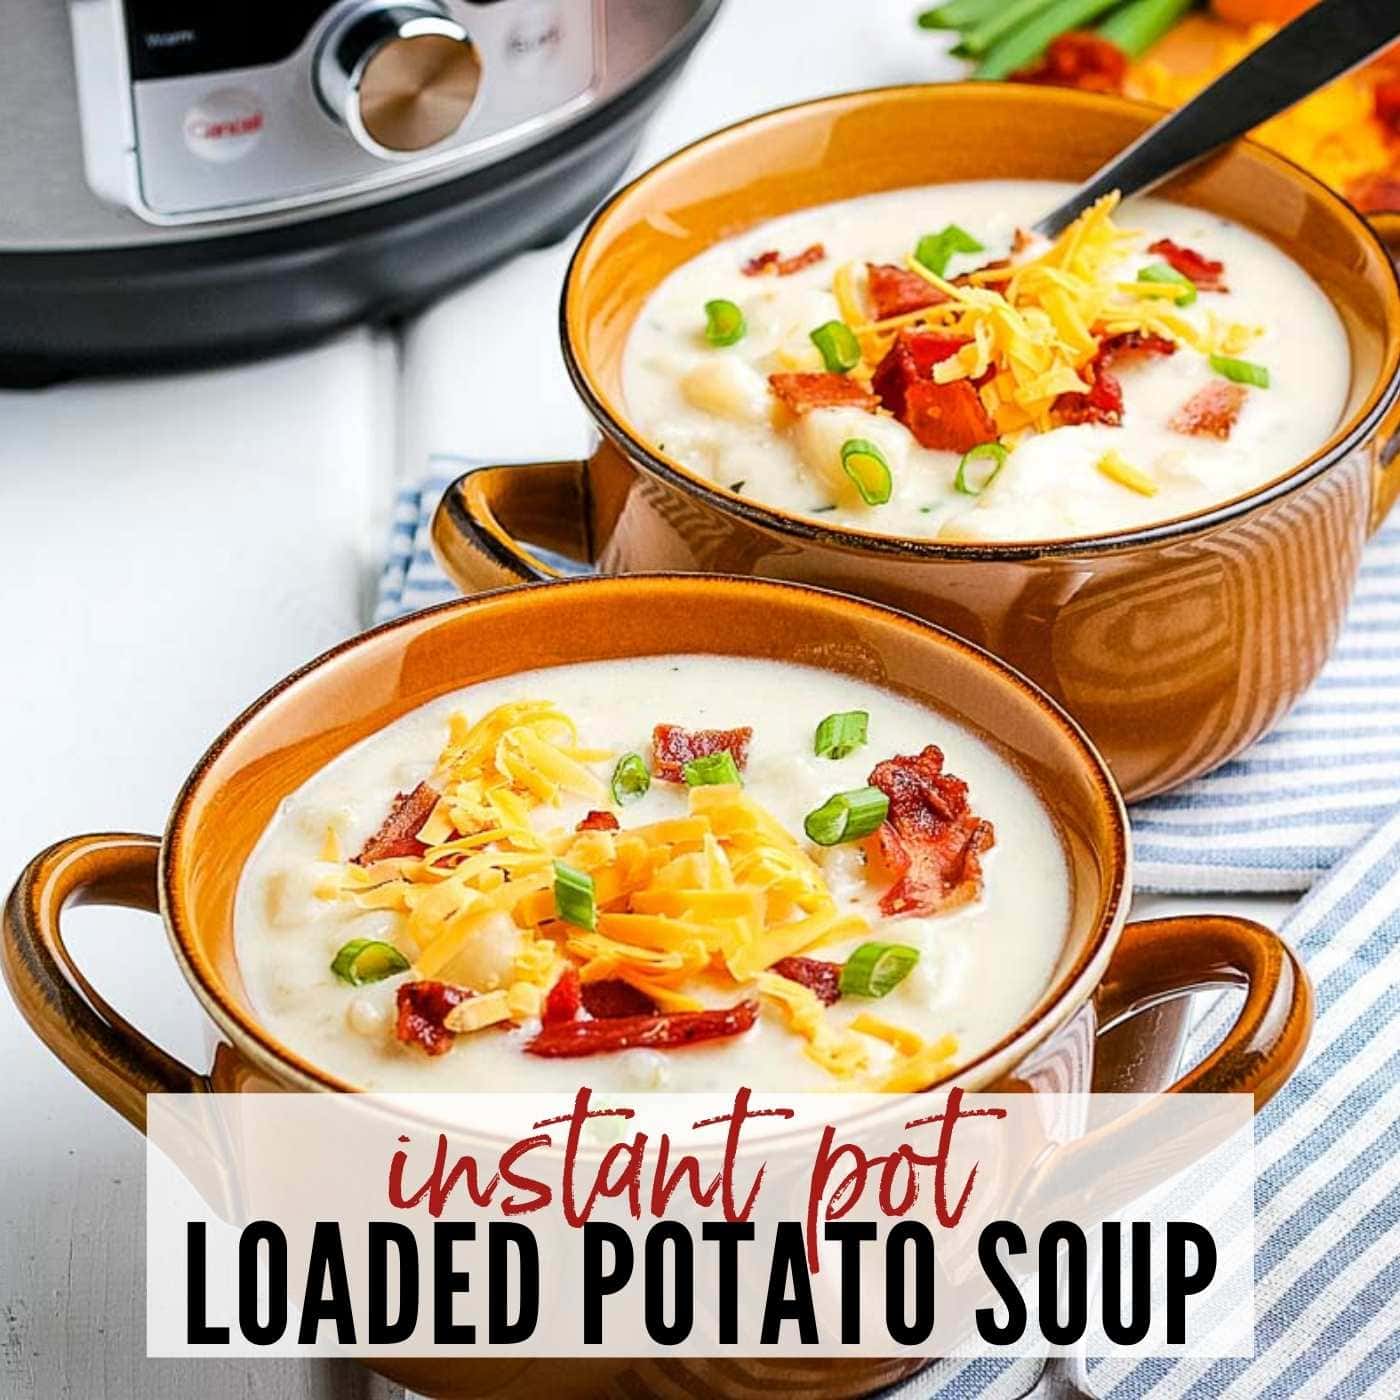 two bowls of loaded potato soup garnished with bacon, cheese and green onions with instant pot in the background.